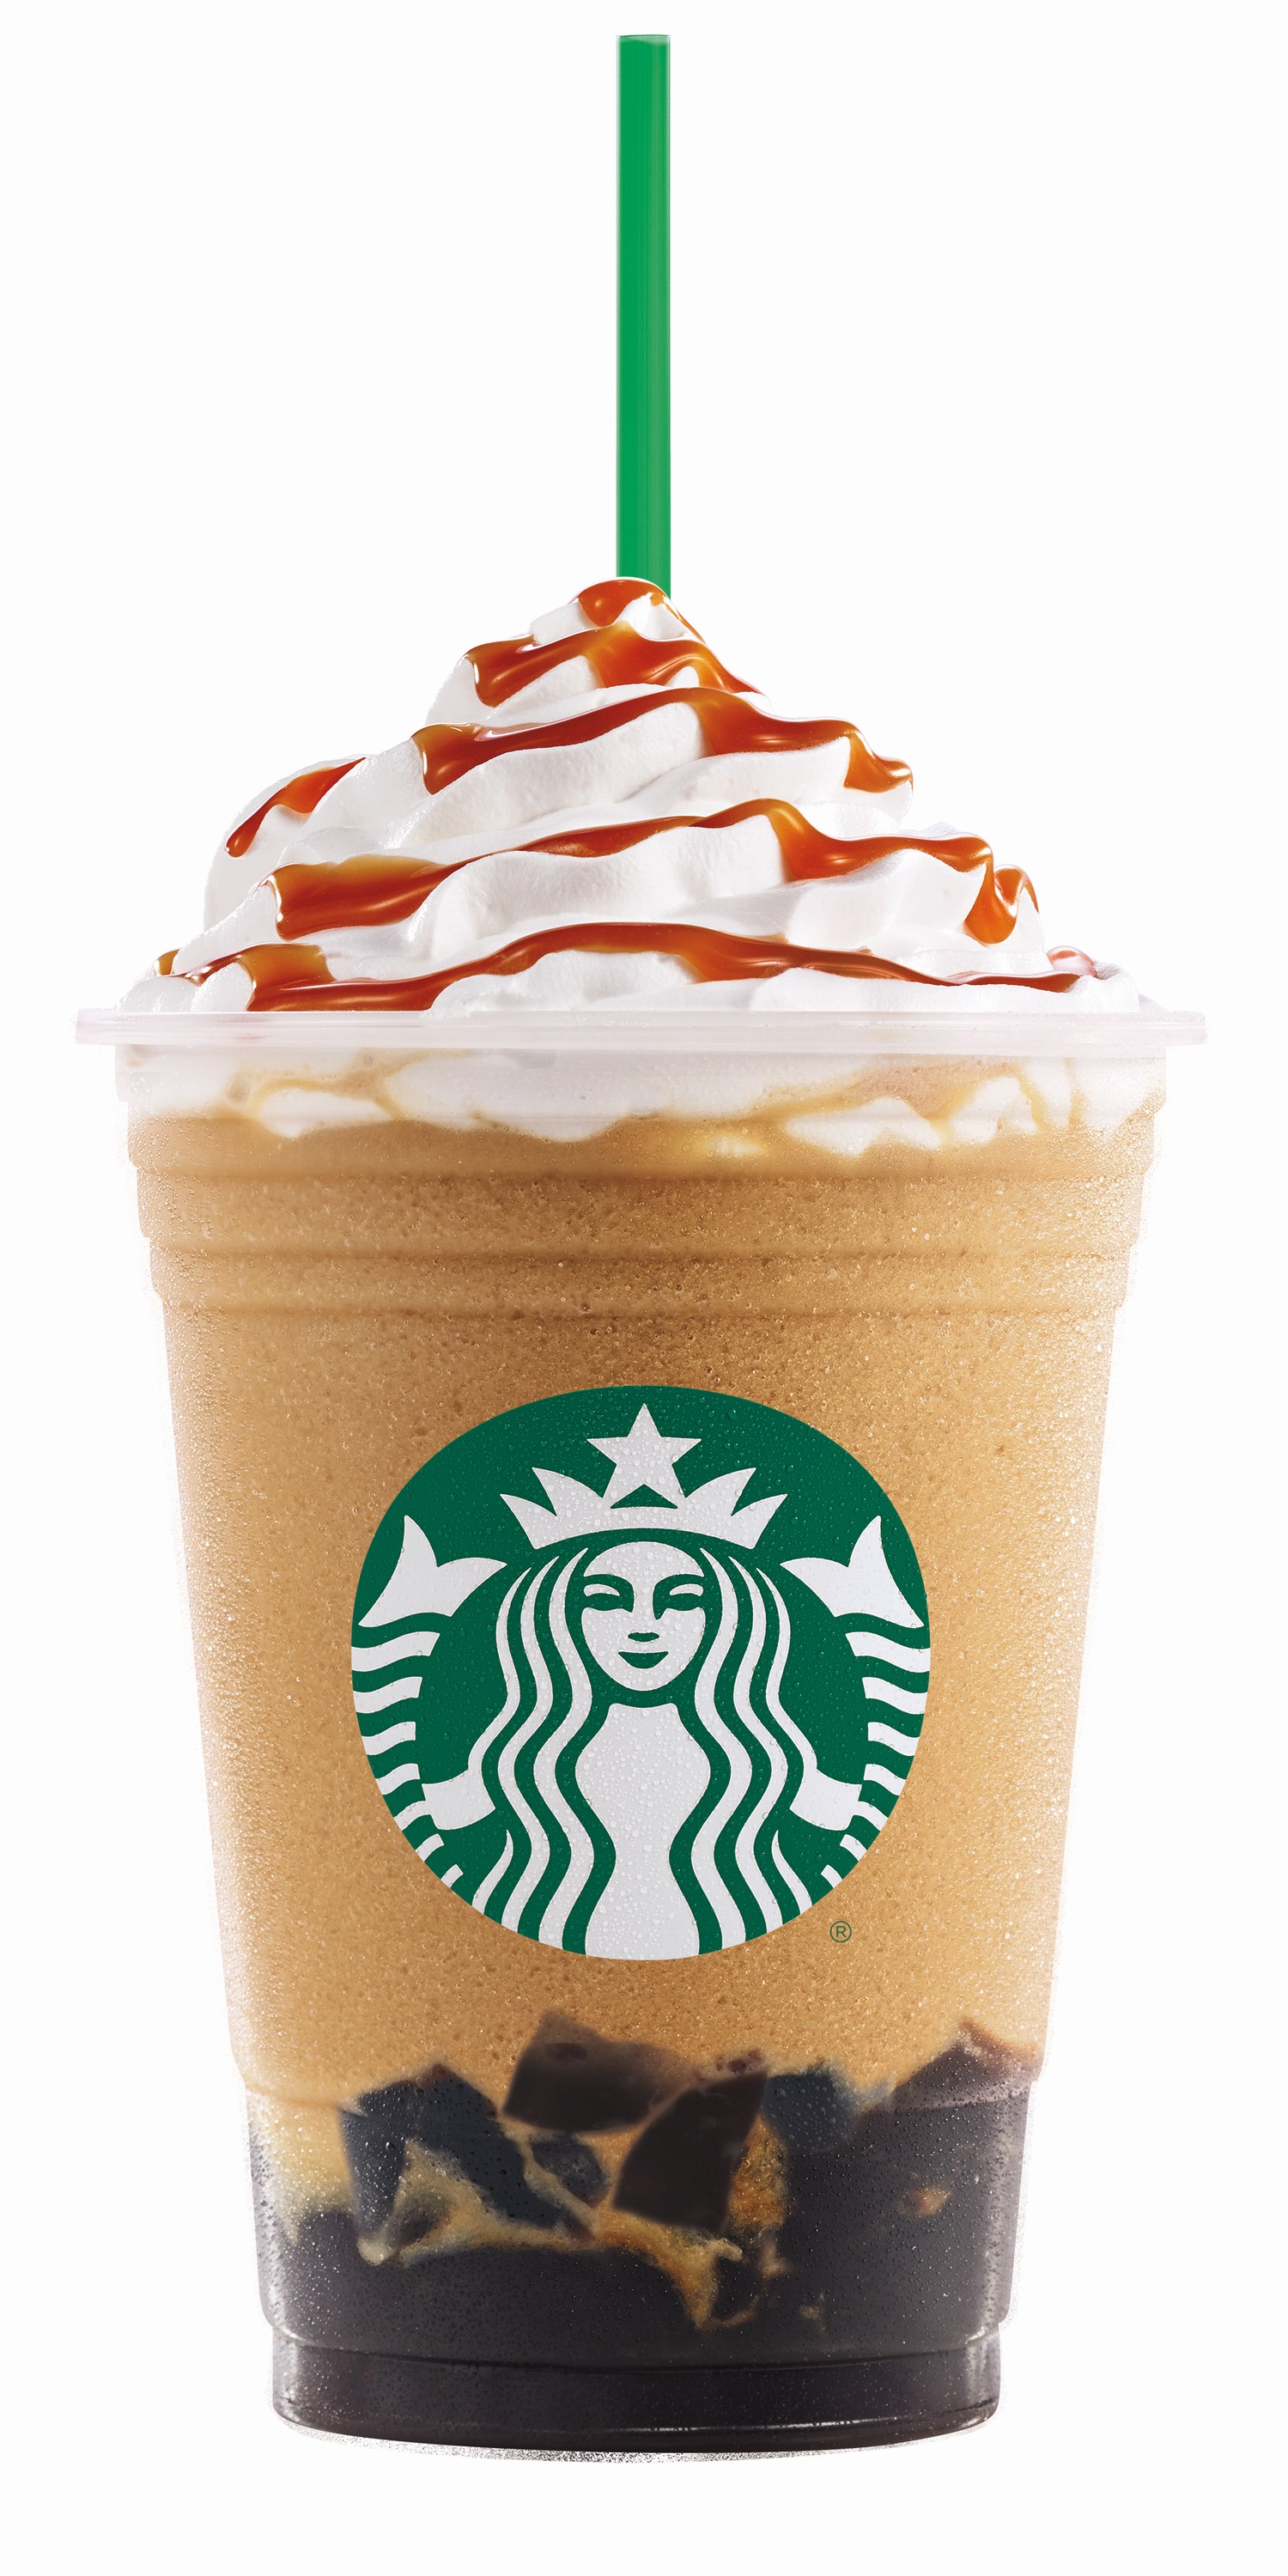 STARBUCKS INTRODUCES UNIQUE FRAPPUCCINO NEWS! - Best Communications